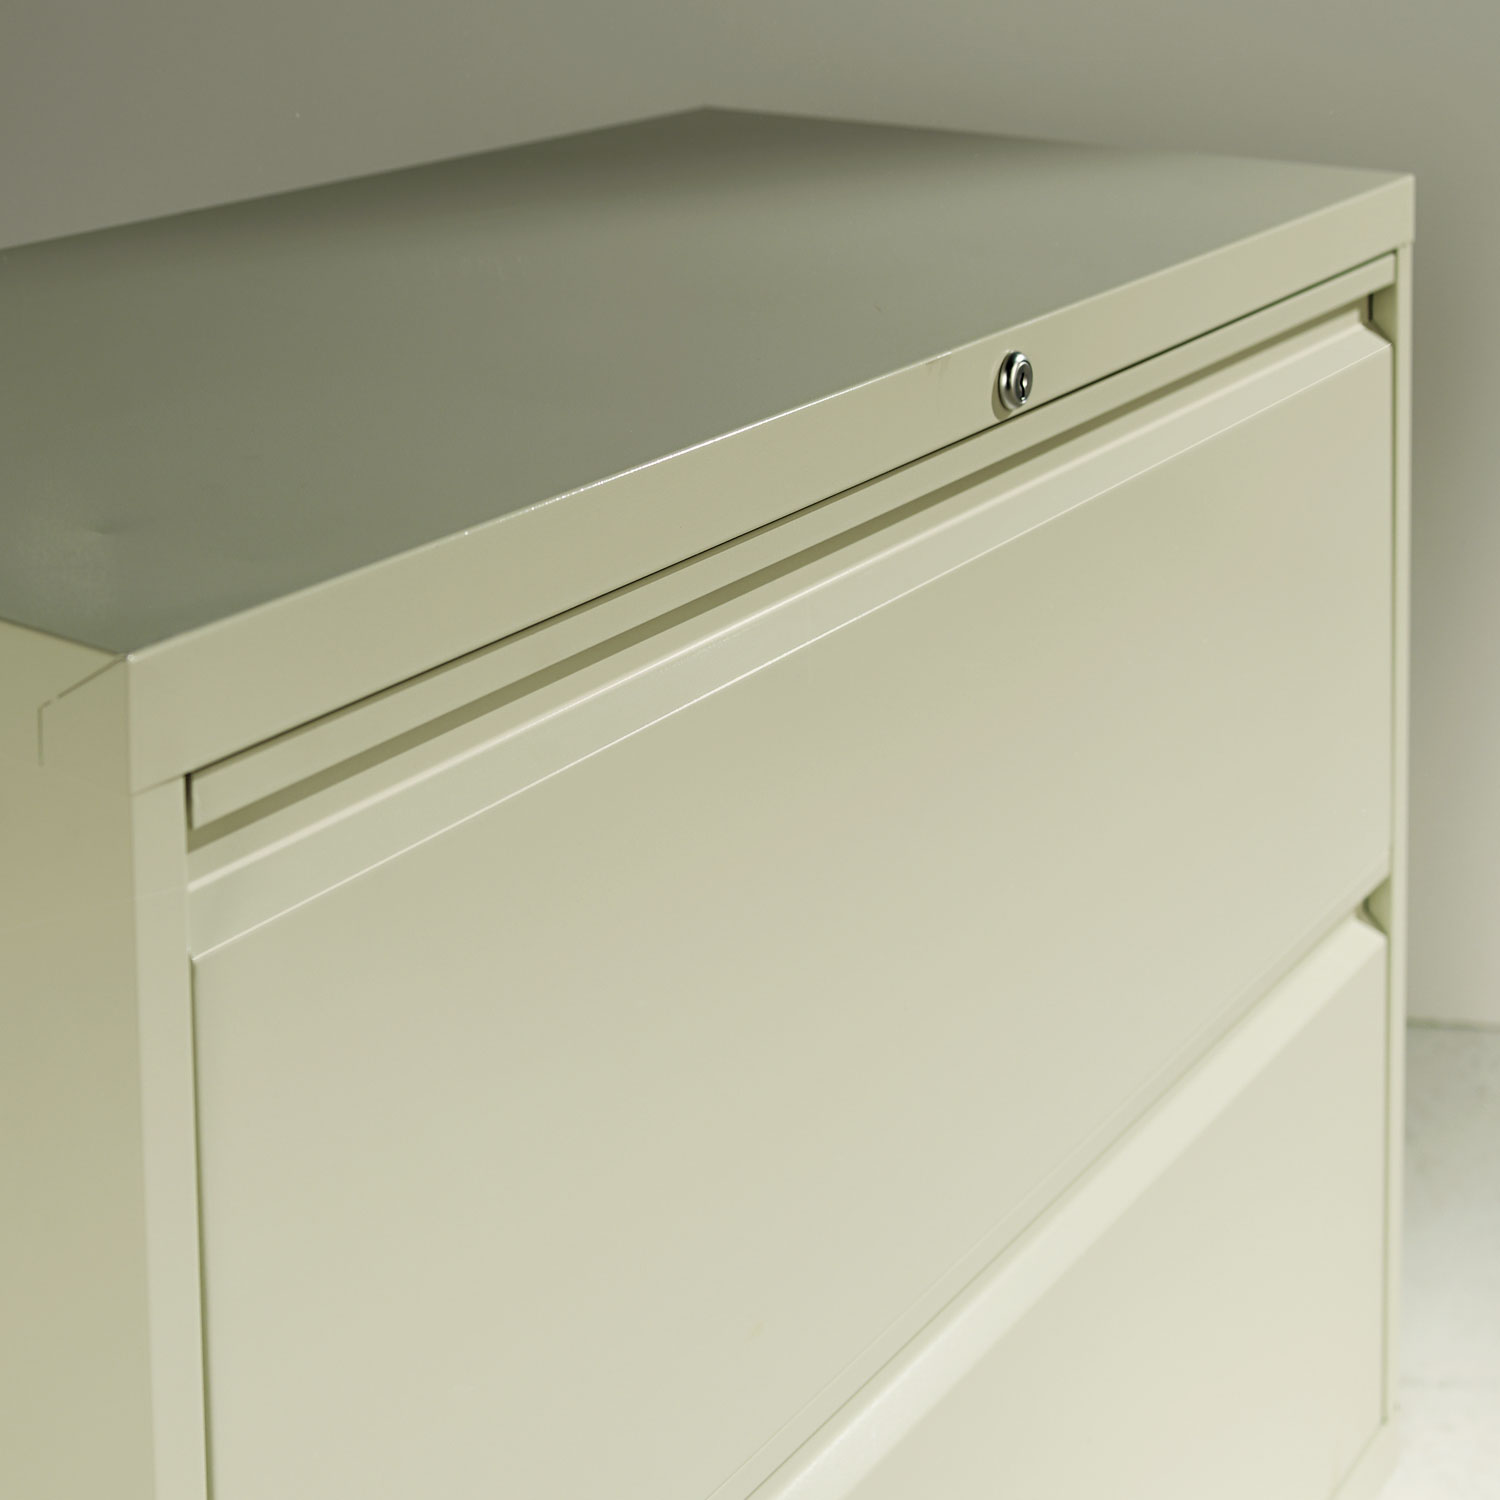 Four-Drawer Lateral File Cabinet, 36w x 18d x 52 1/2h, Light Gray